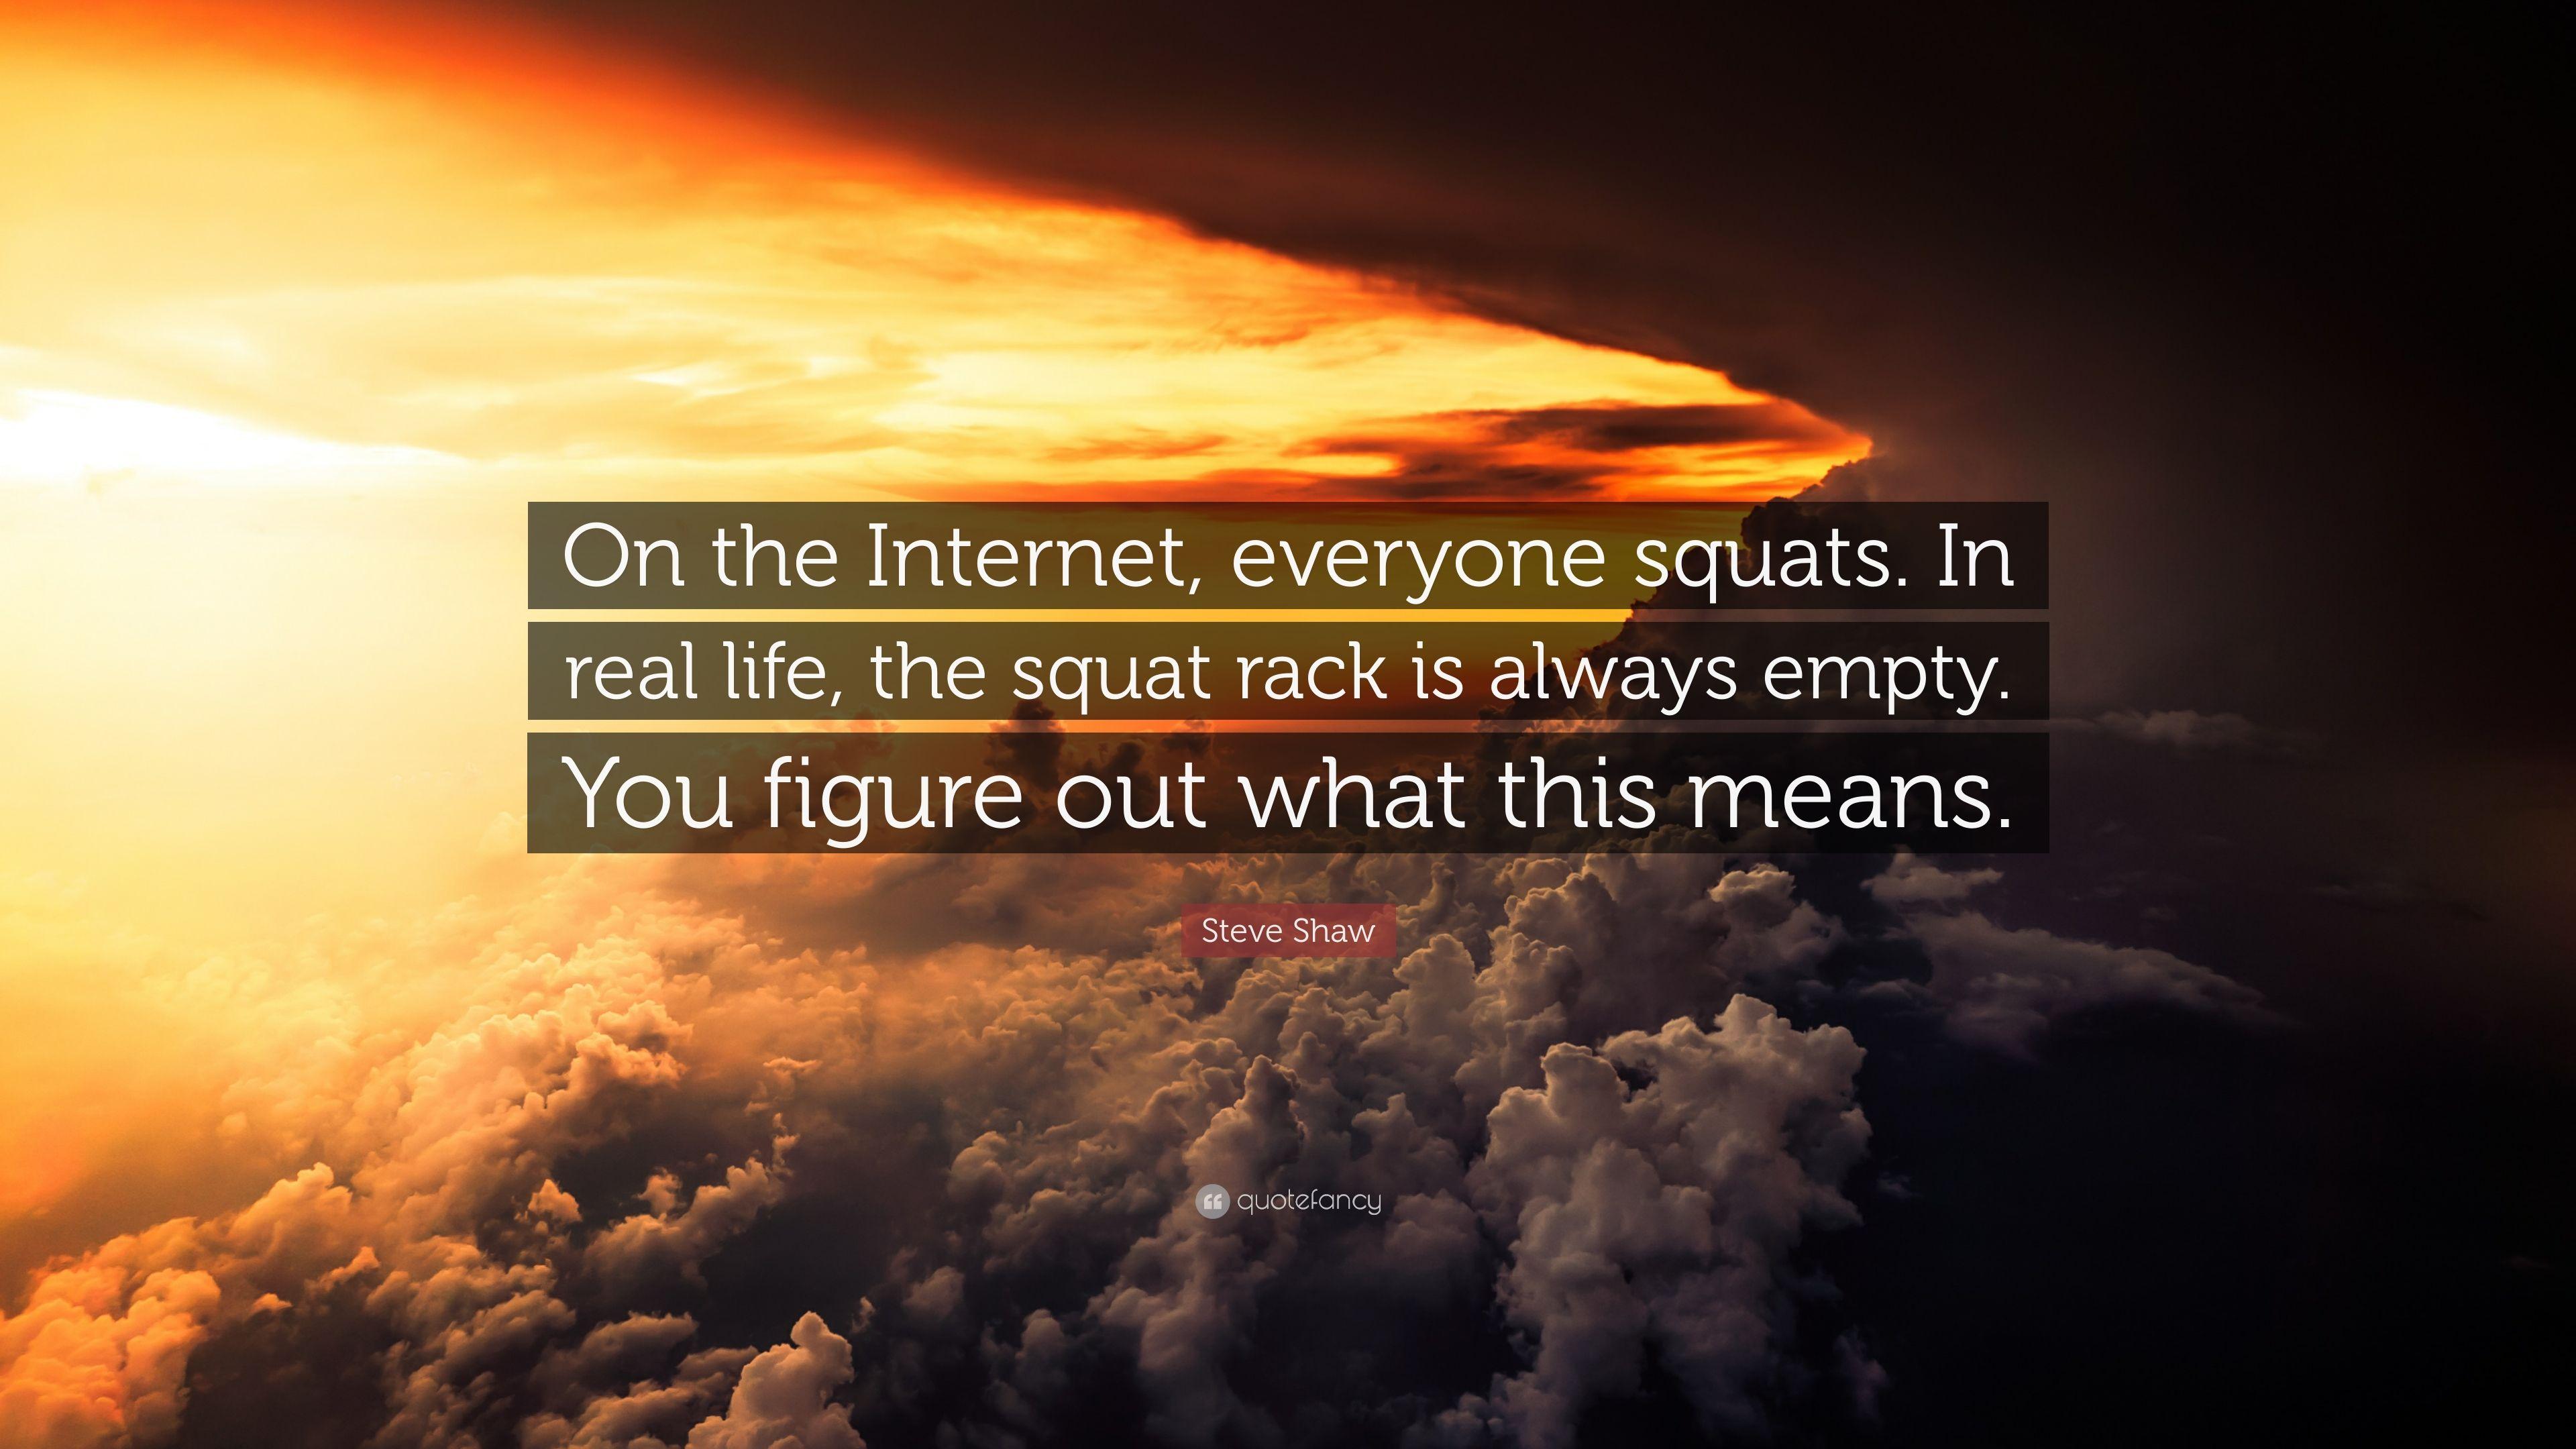 Steve Shaw Quote: “On the Internet, everyone squats. In real